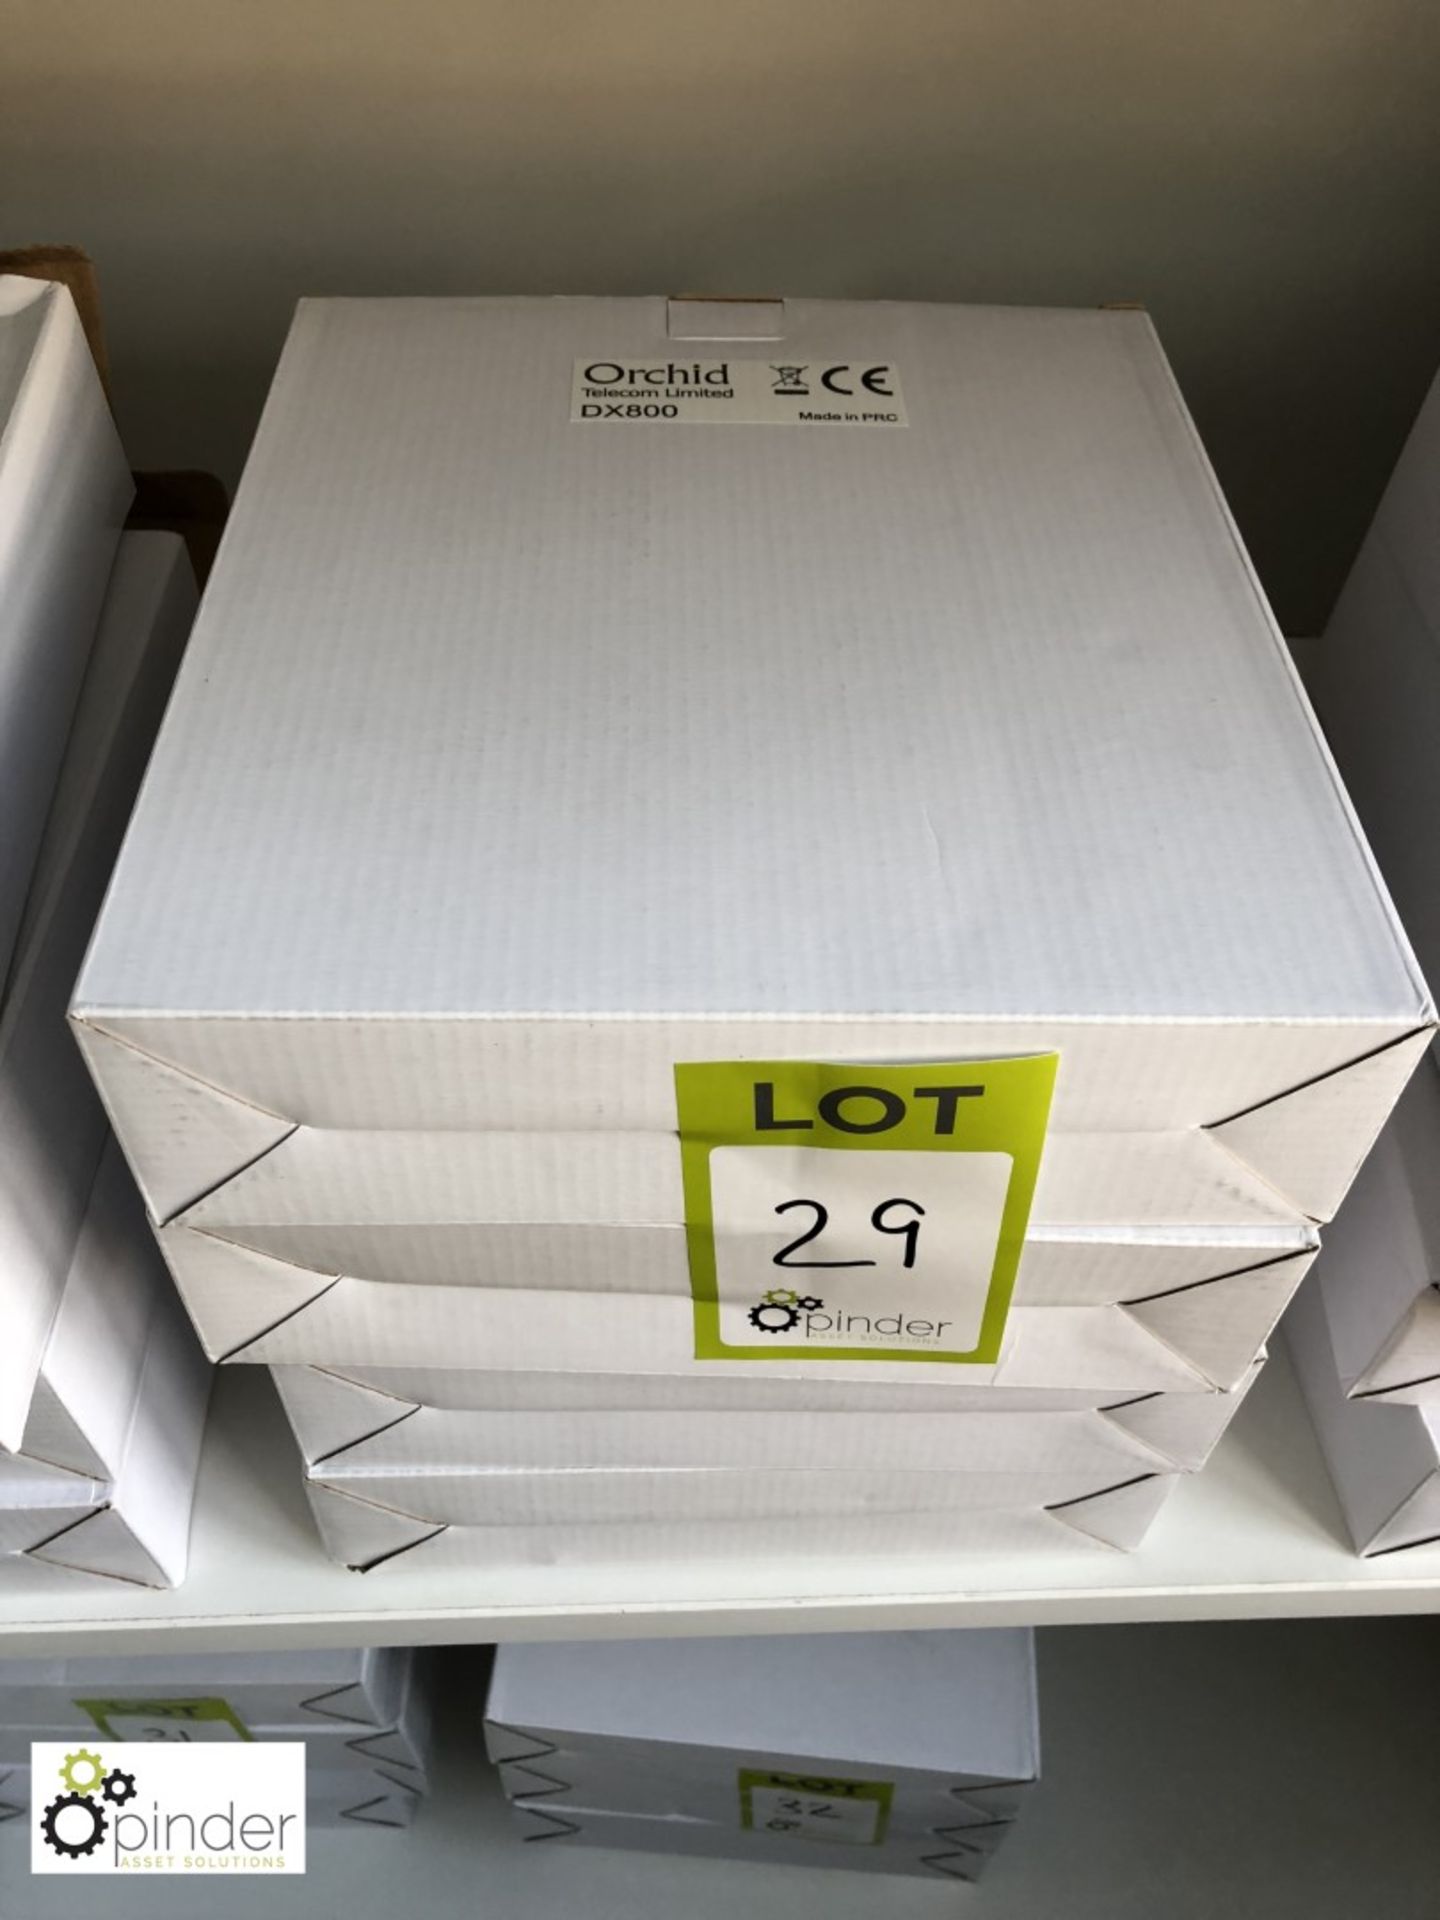 4 Orchid DX800 Telephone Handsets, boxed (located in Suite 13, second floor, building 1) - Image 2 of 2